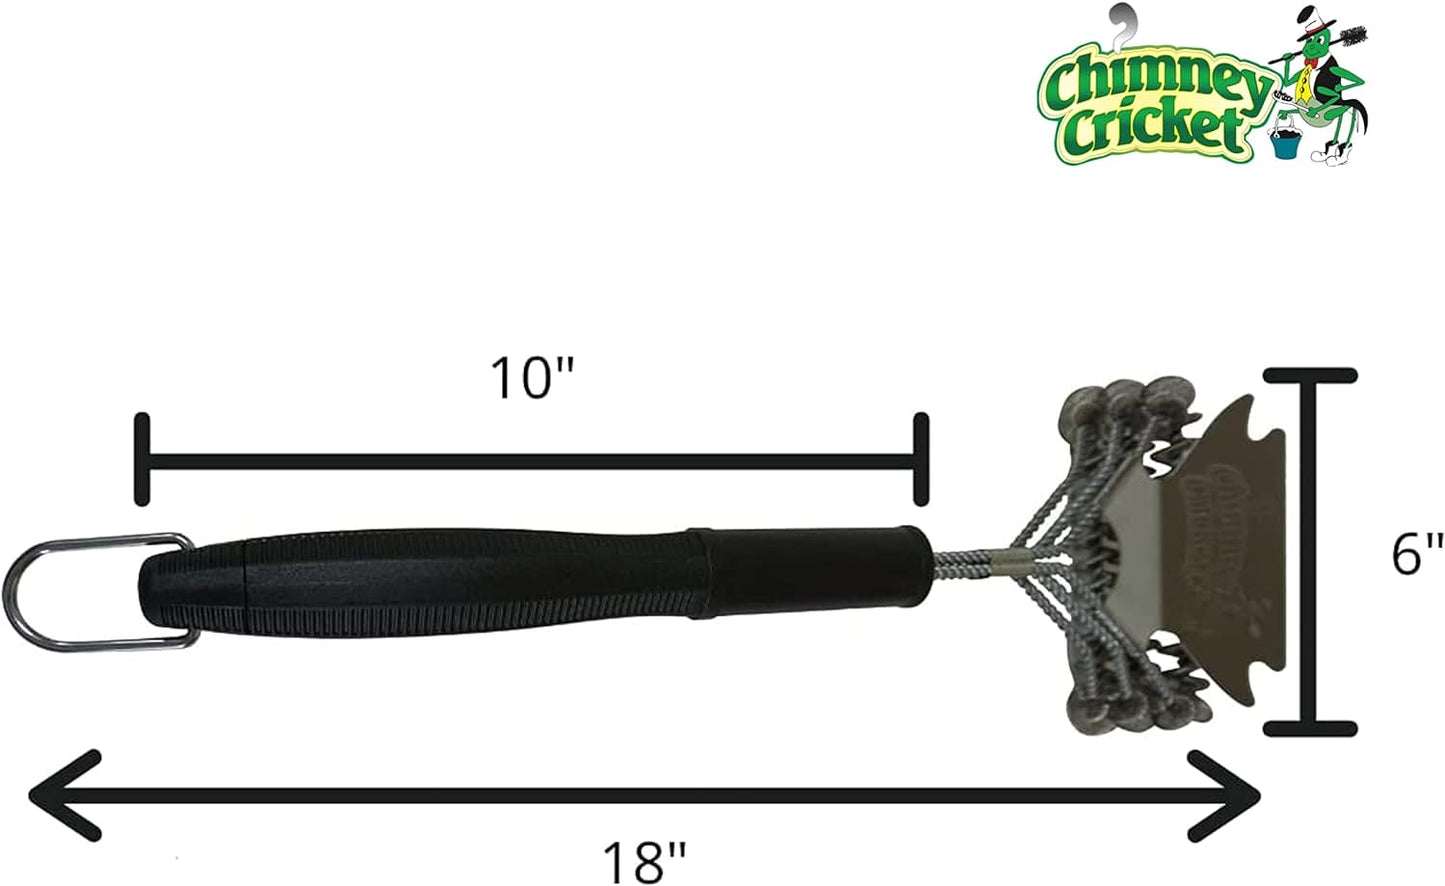 Chimney Cricket BBQ Grill Brush & Scraper | Bristle-Free, Safe, & Deep Cleaning Scrubber - 18" - Best for Barbecue Grill Cleaning